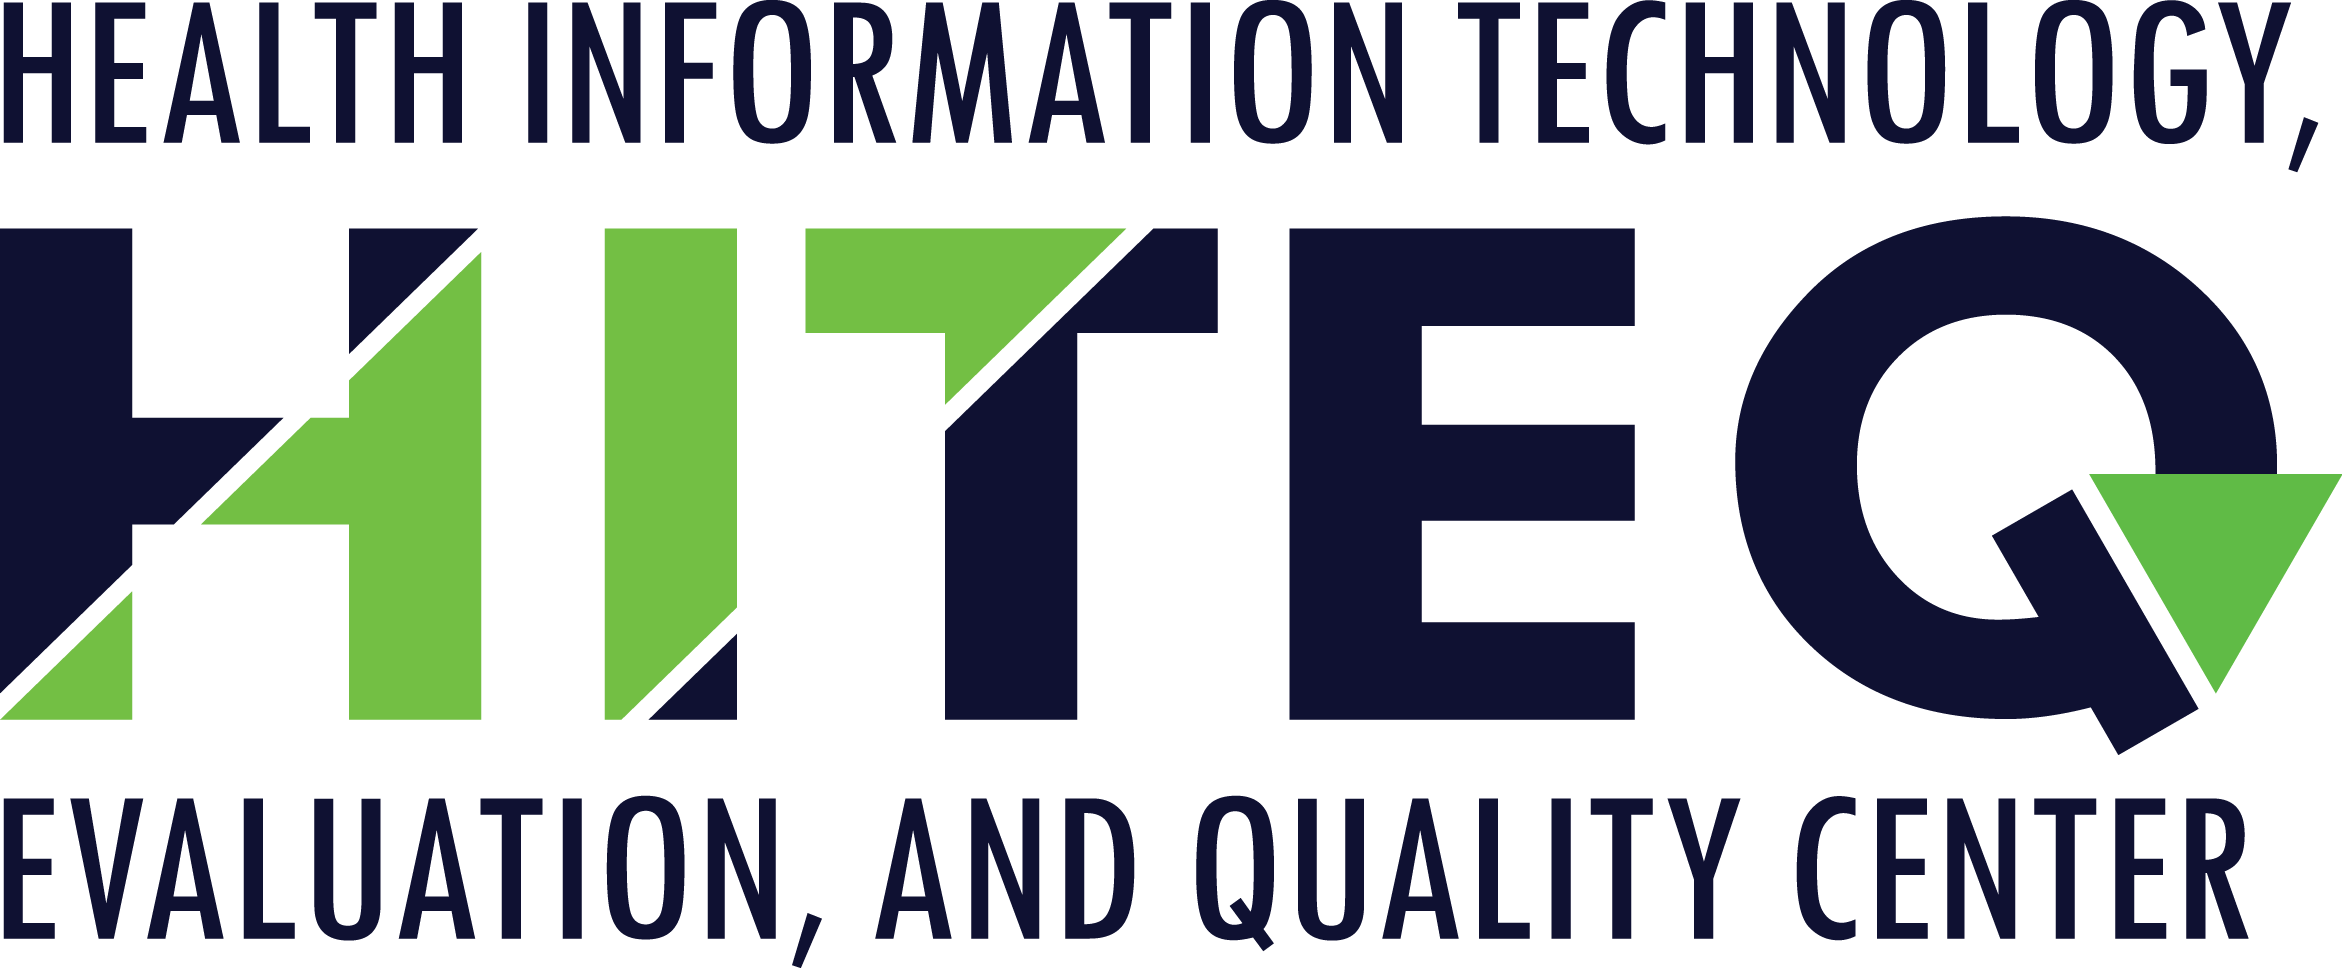 logo for Health Information Technology, Evaluation, and Quality Center